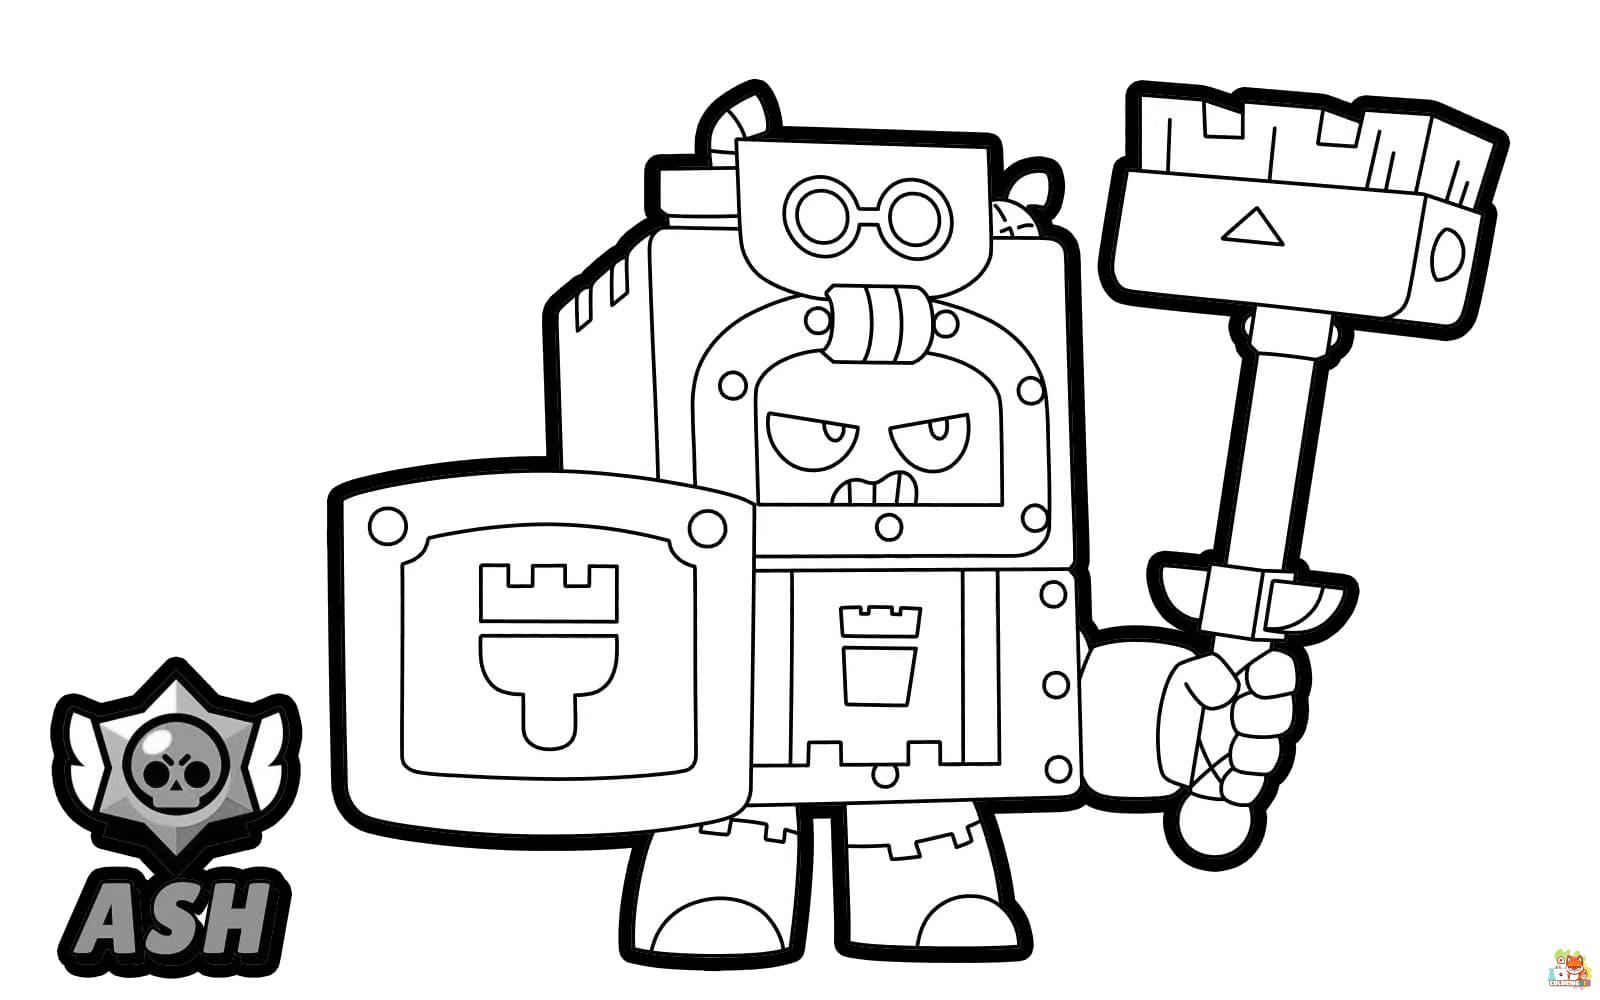 brawl stars characters coloring pages